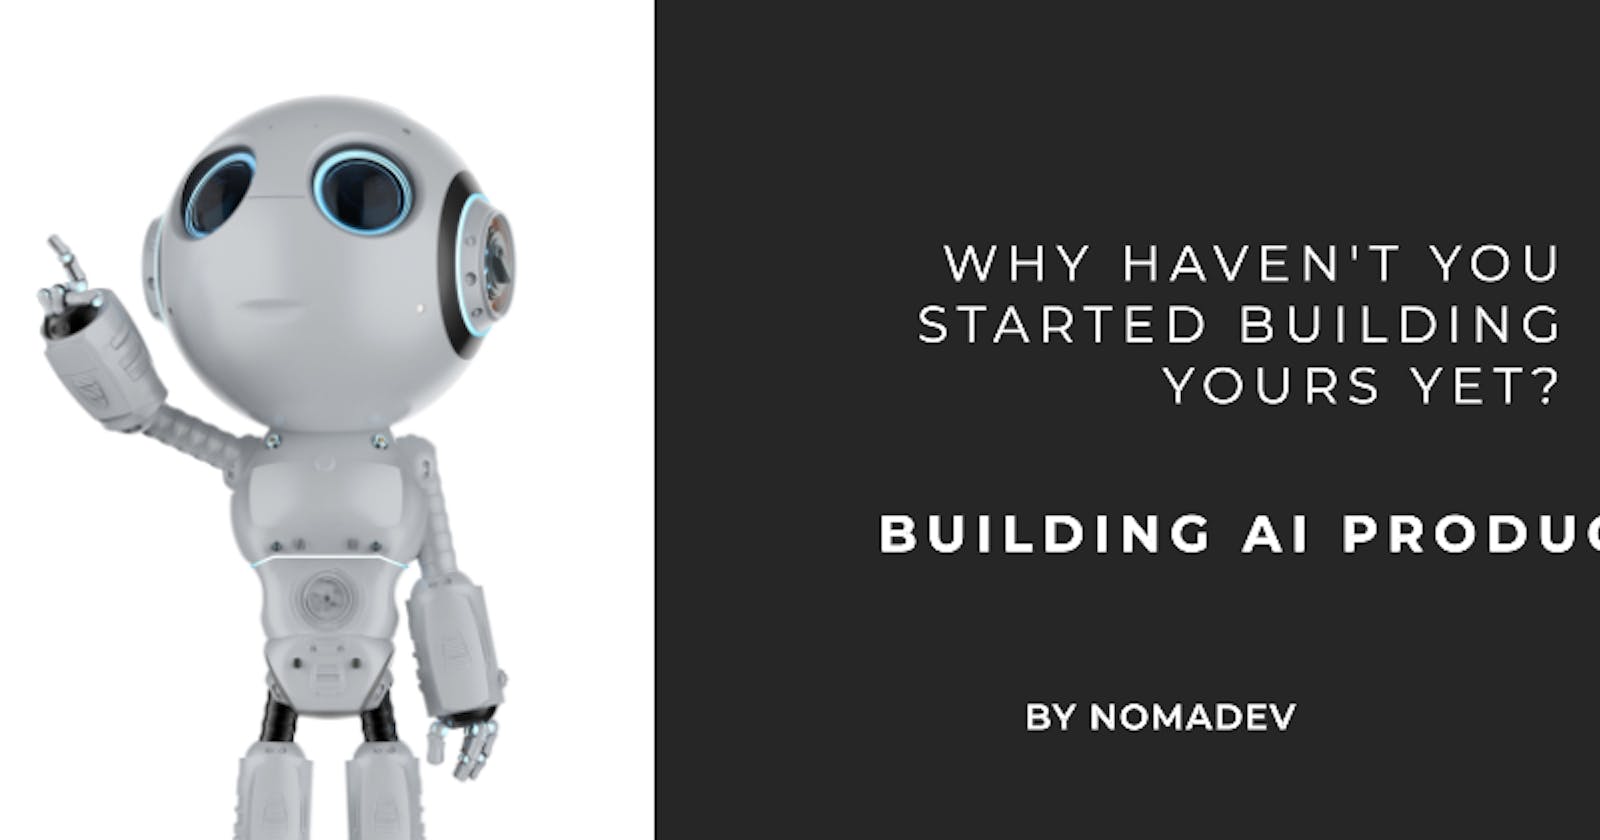 Building AI Products - Why Haven't You Started Building Yours Yet?